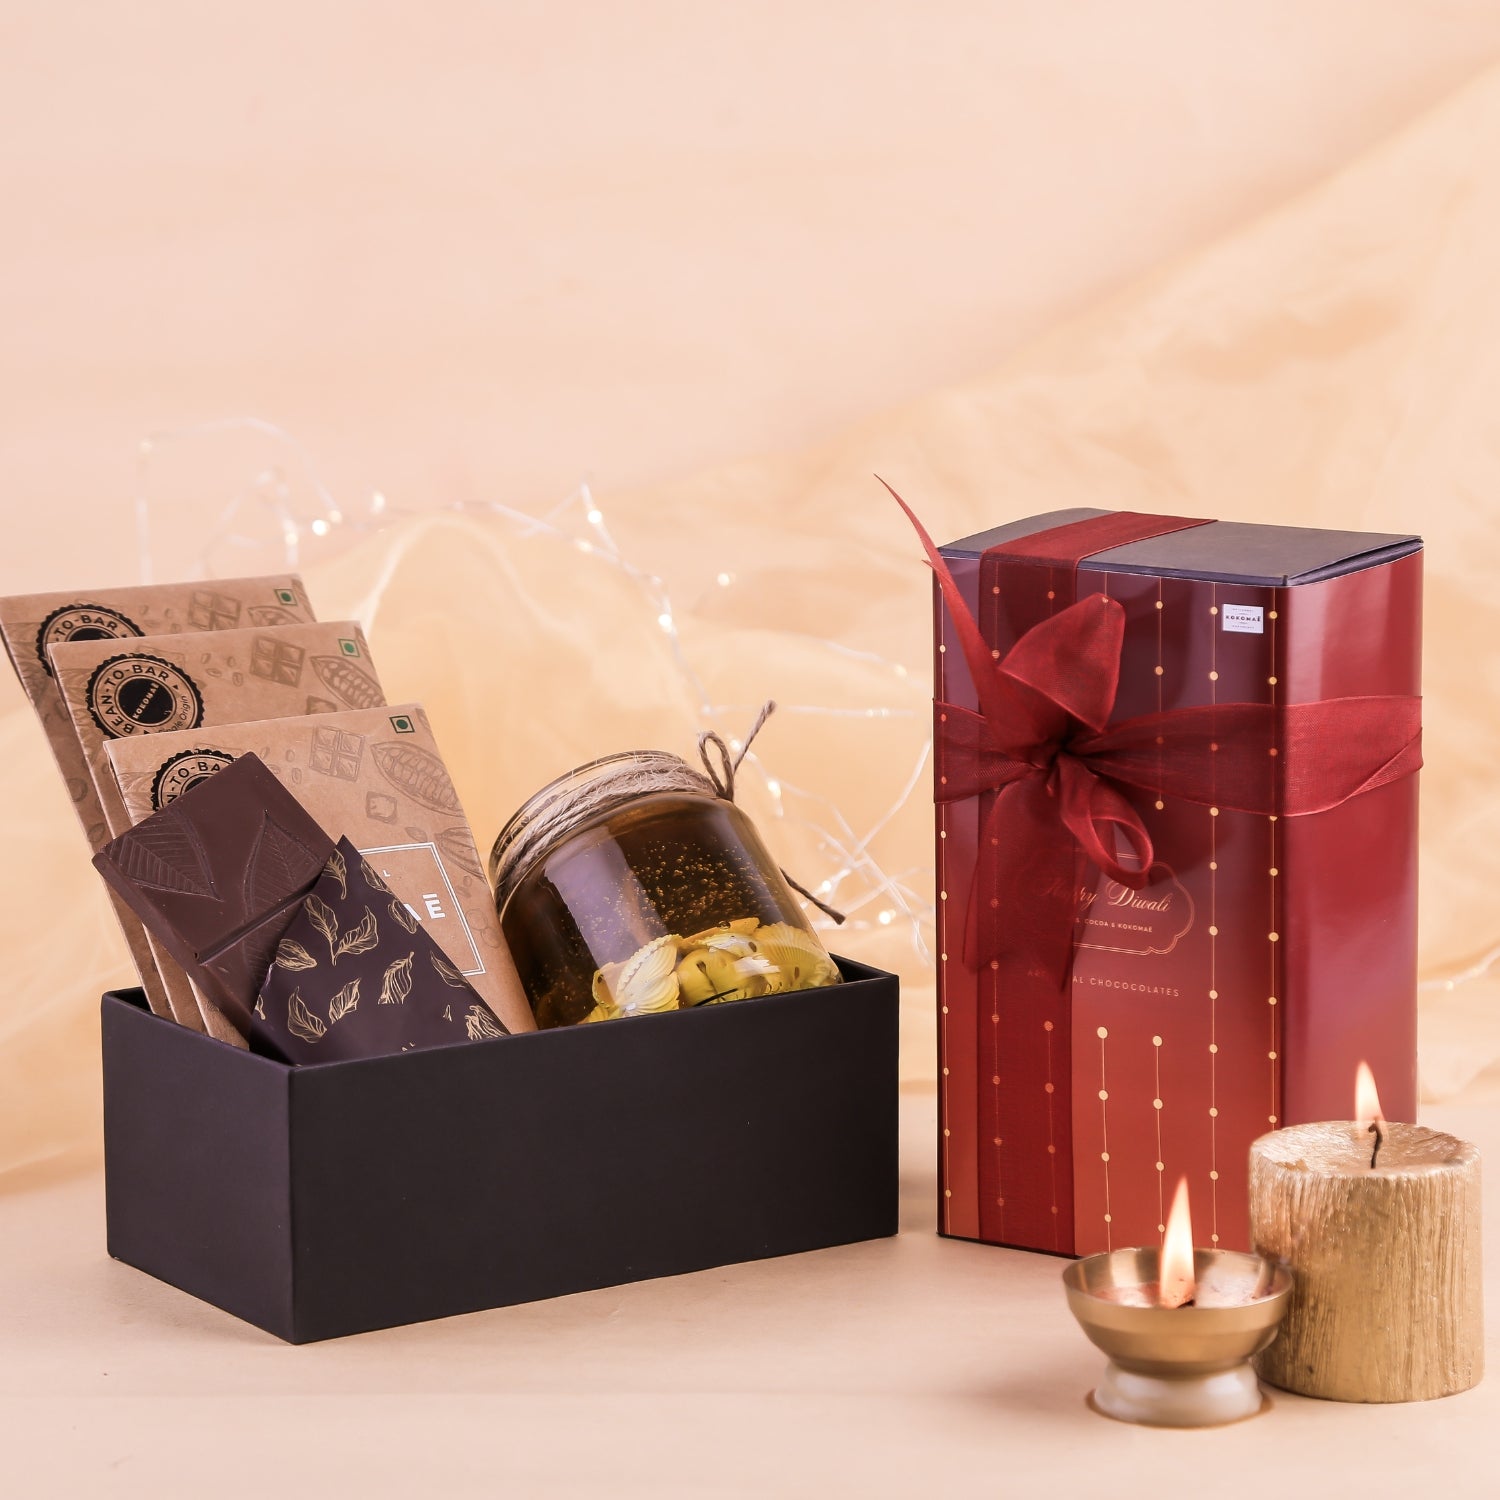 Kokomaē Handcrafted Diwali Gift Box with 3 Bean to Bar Chocolates & an offering